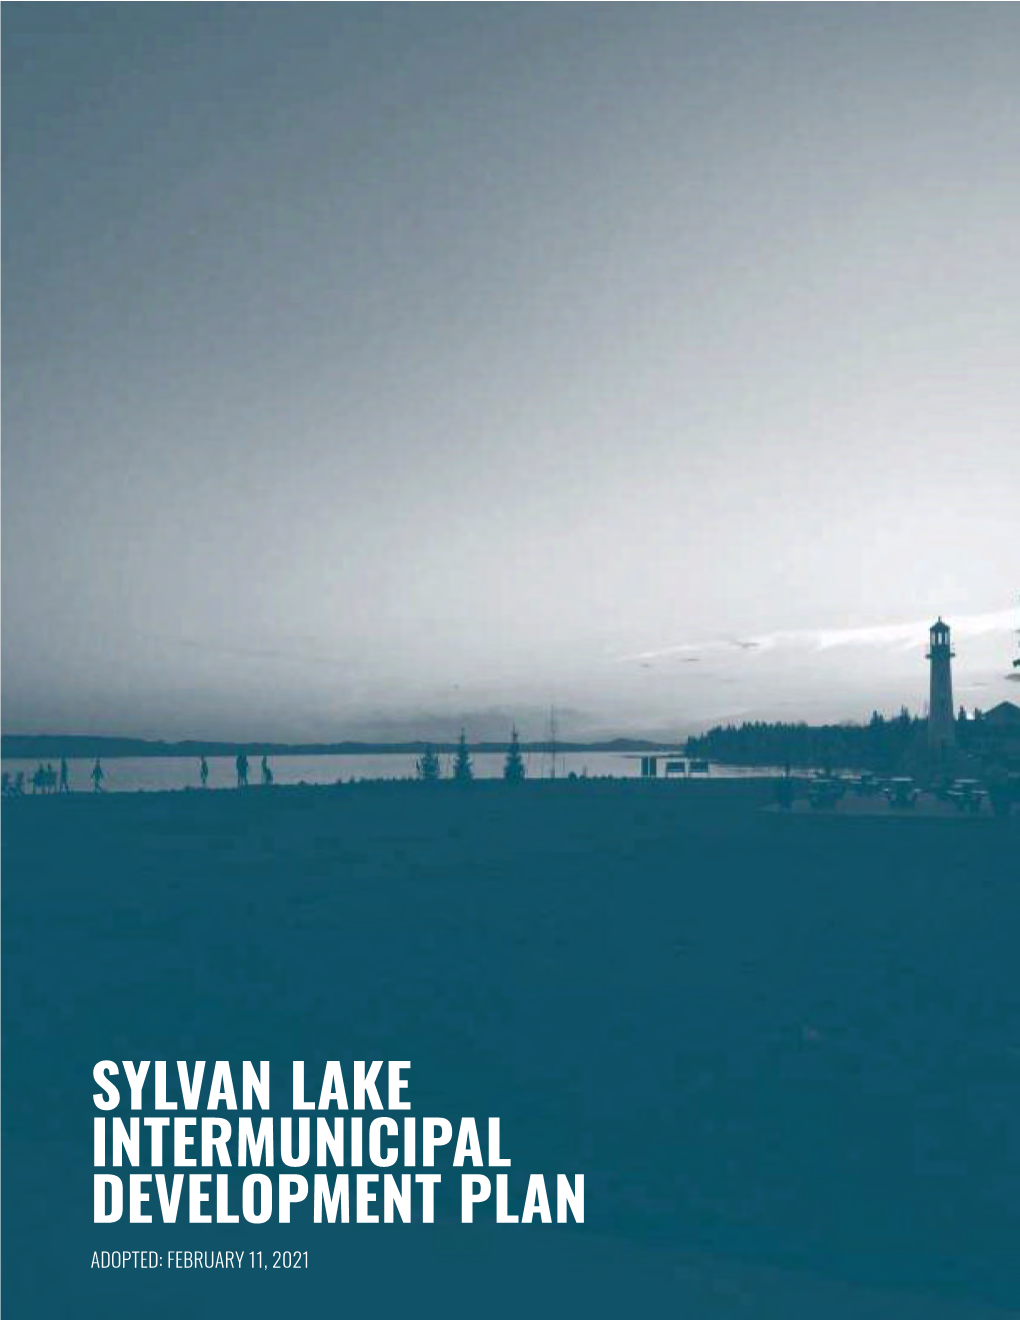 SYLVAN LAKE INTERMUNICIPAL DEVELOPMENT PLAN ADOPTED: FEBRUARY 11, 2021 LACOMBE Red Deer County ,.-- COUNTY ~